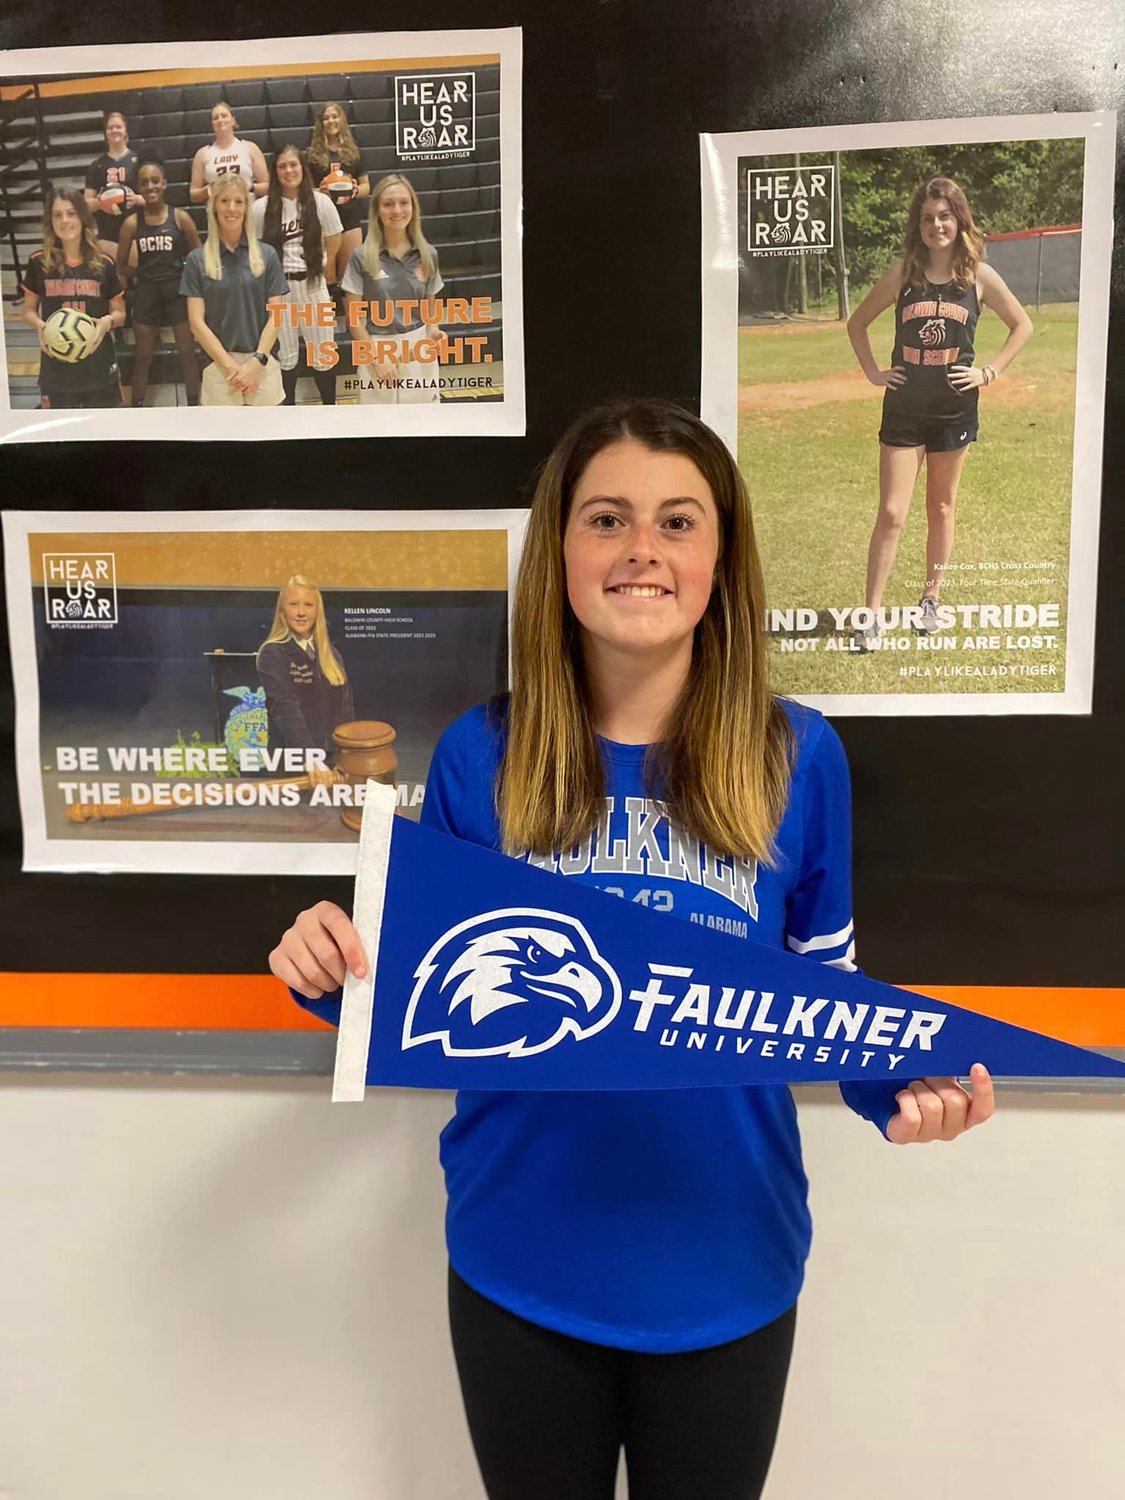 The newest Faulkner University cross country signee is four-time state qualifier from Baldwin County High School, Kailee Cox. After she became only the fourth female runner to compete in four state meets, Cox became the Tigers’ first female cross country runner to join the college ranks.